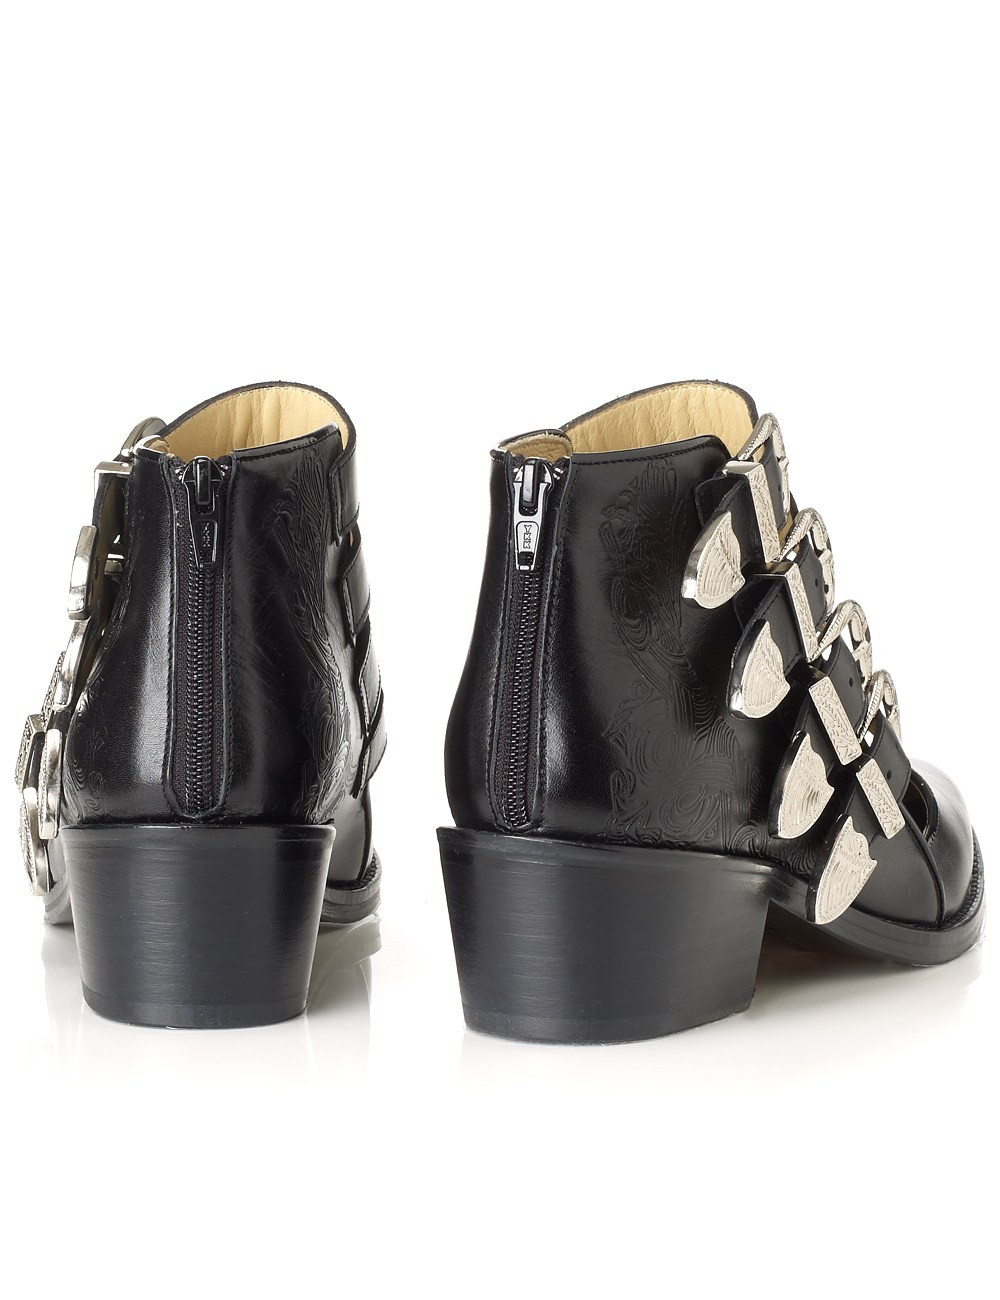 Toga pulla Black Leather Cut Out Shoes in Black | Lyst